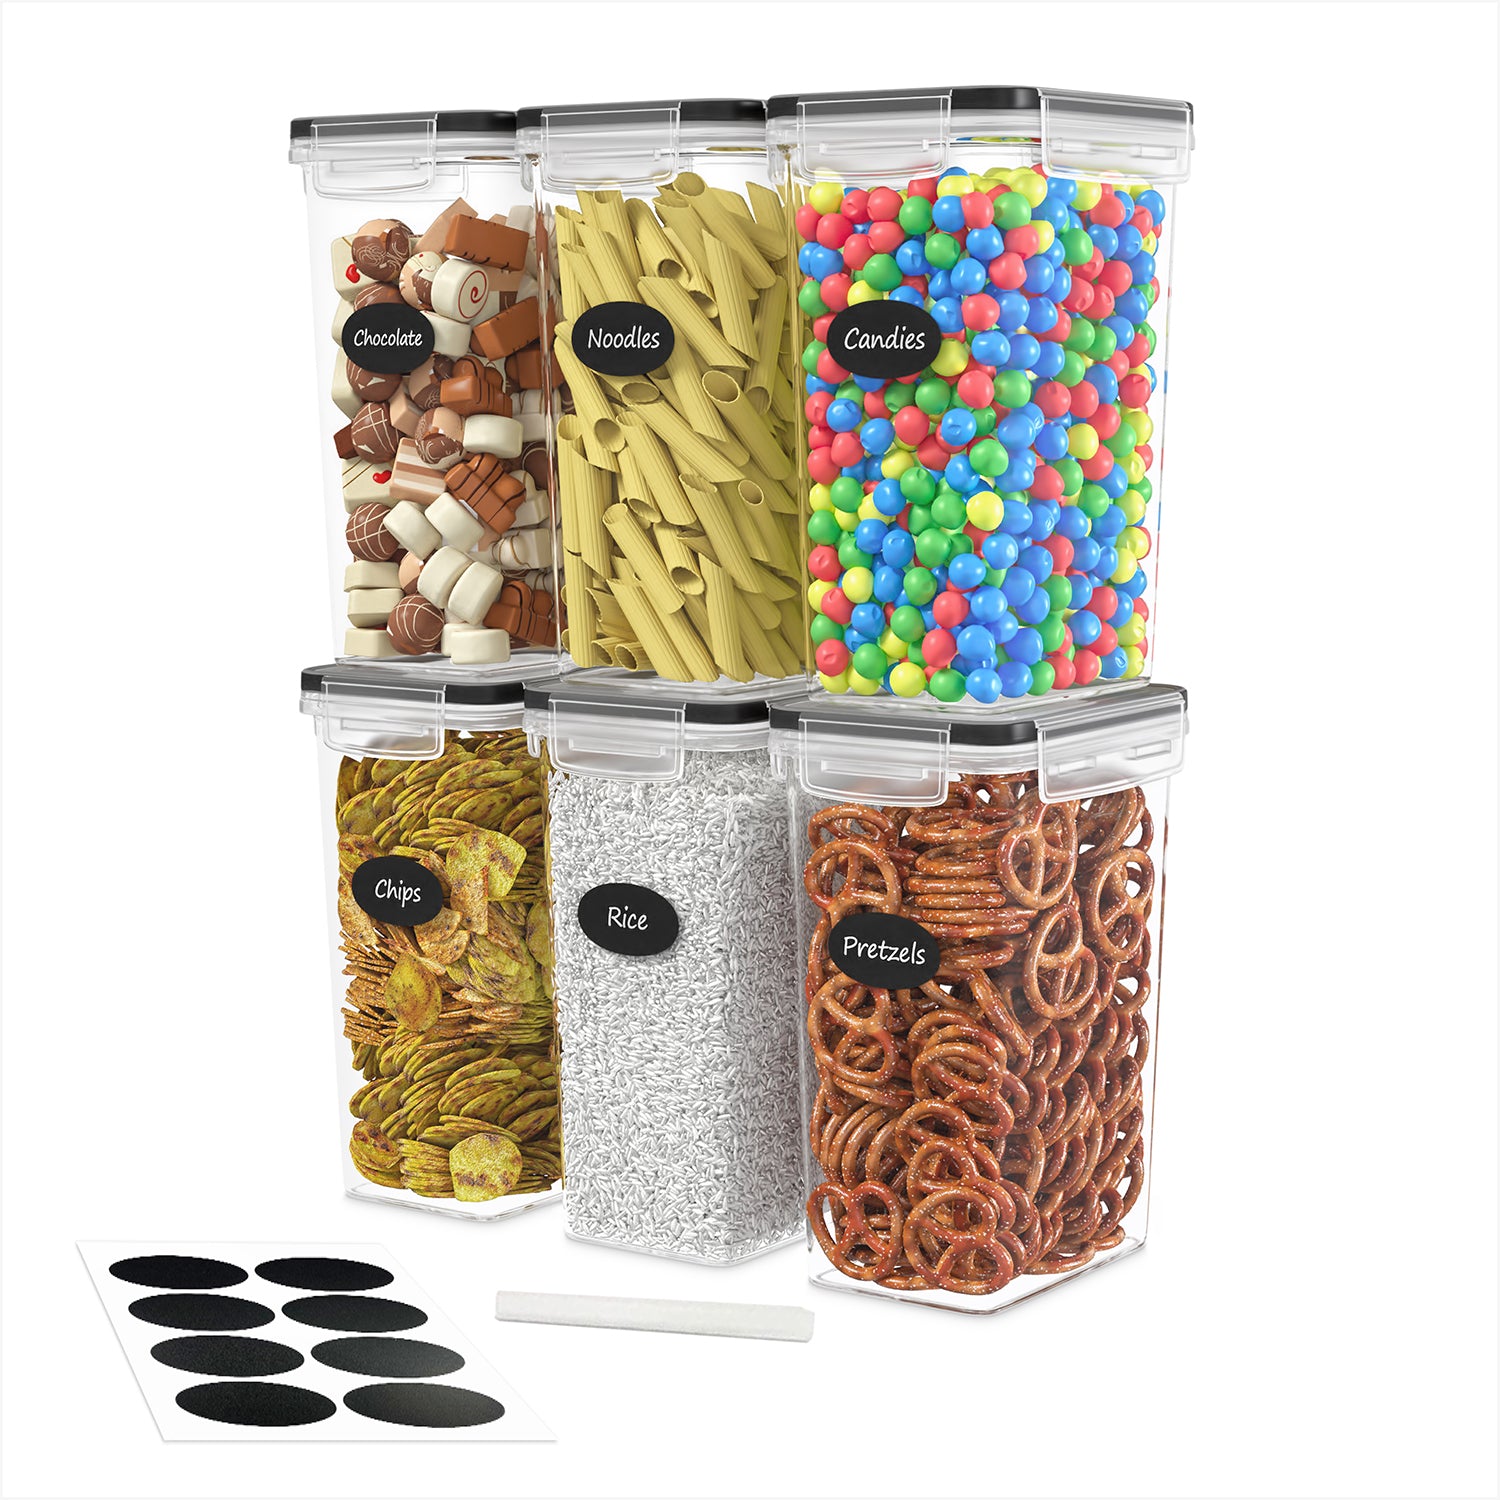 Airtight Food Storage Containers, Plastic Bpa Free Kitchen Pantry